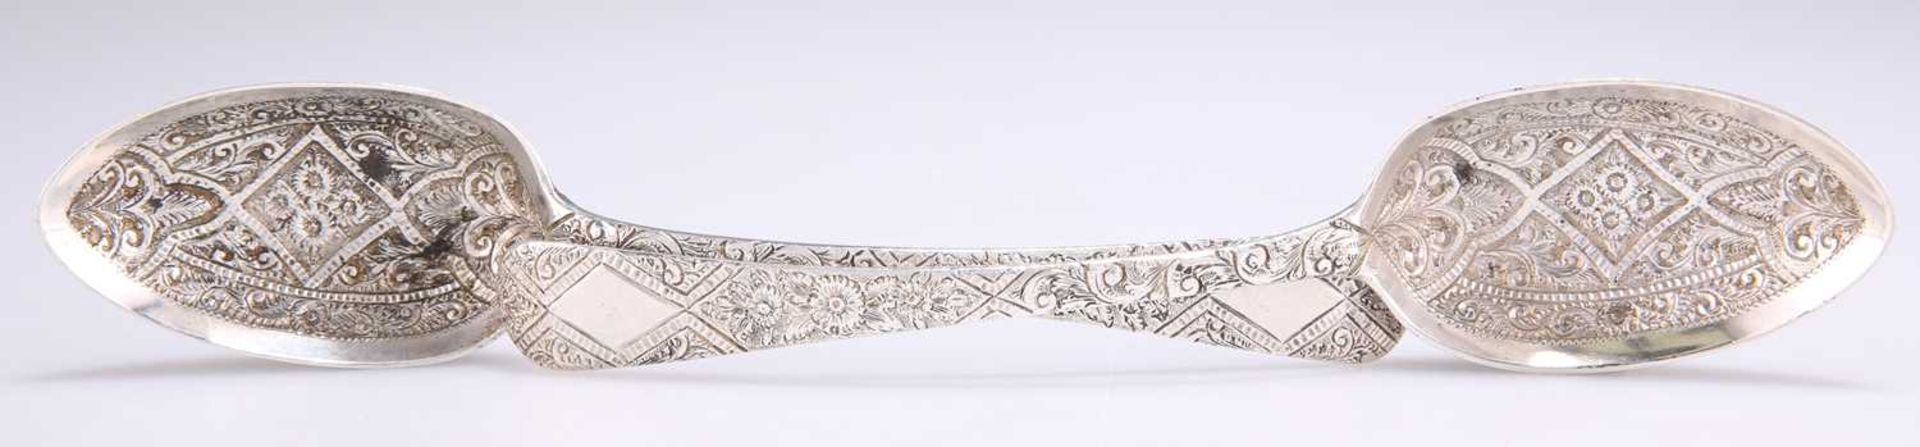 A PAIR OF GEORGE III SILVER DESSERT SPOONS